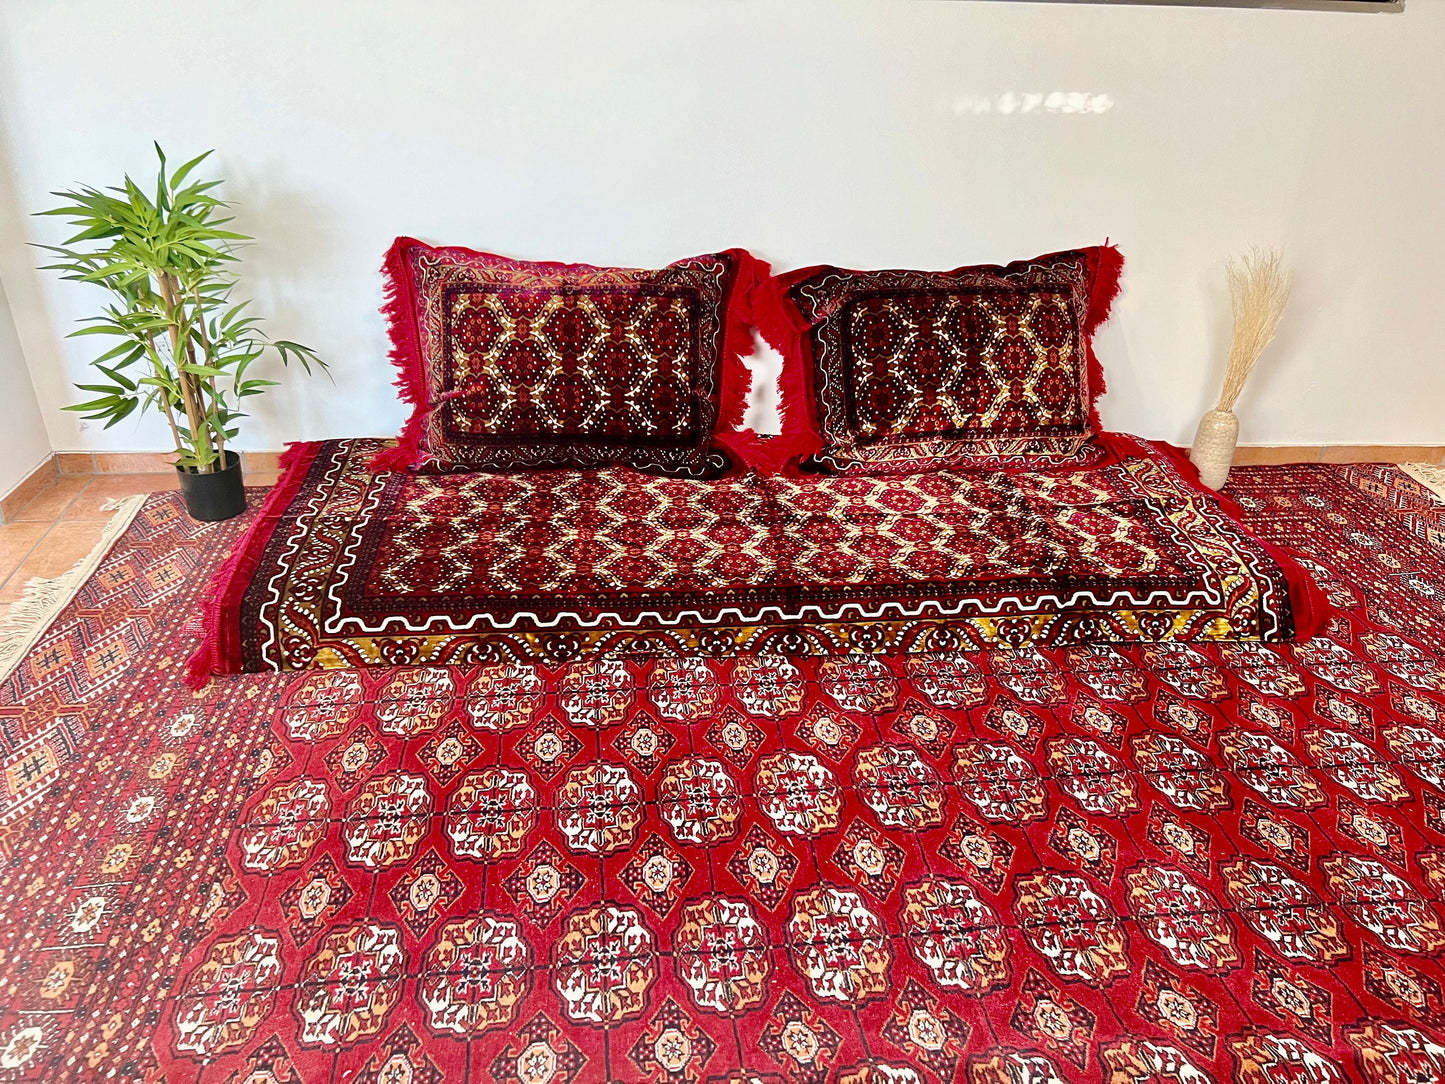 Arabic Majlis Floor cushion Seating, afghan toshak cover, Oriental Floor sofa set, 1 mattress cover + 2 pillows covers(3pcs cover only)